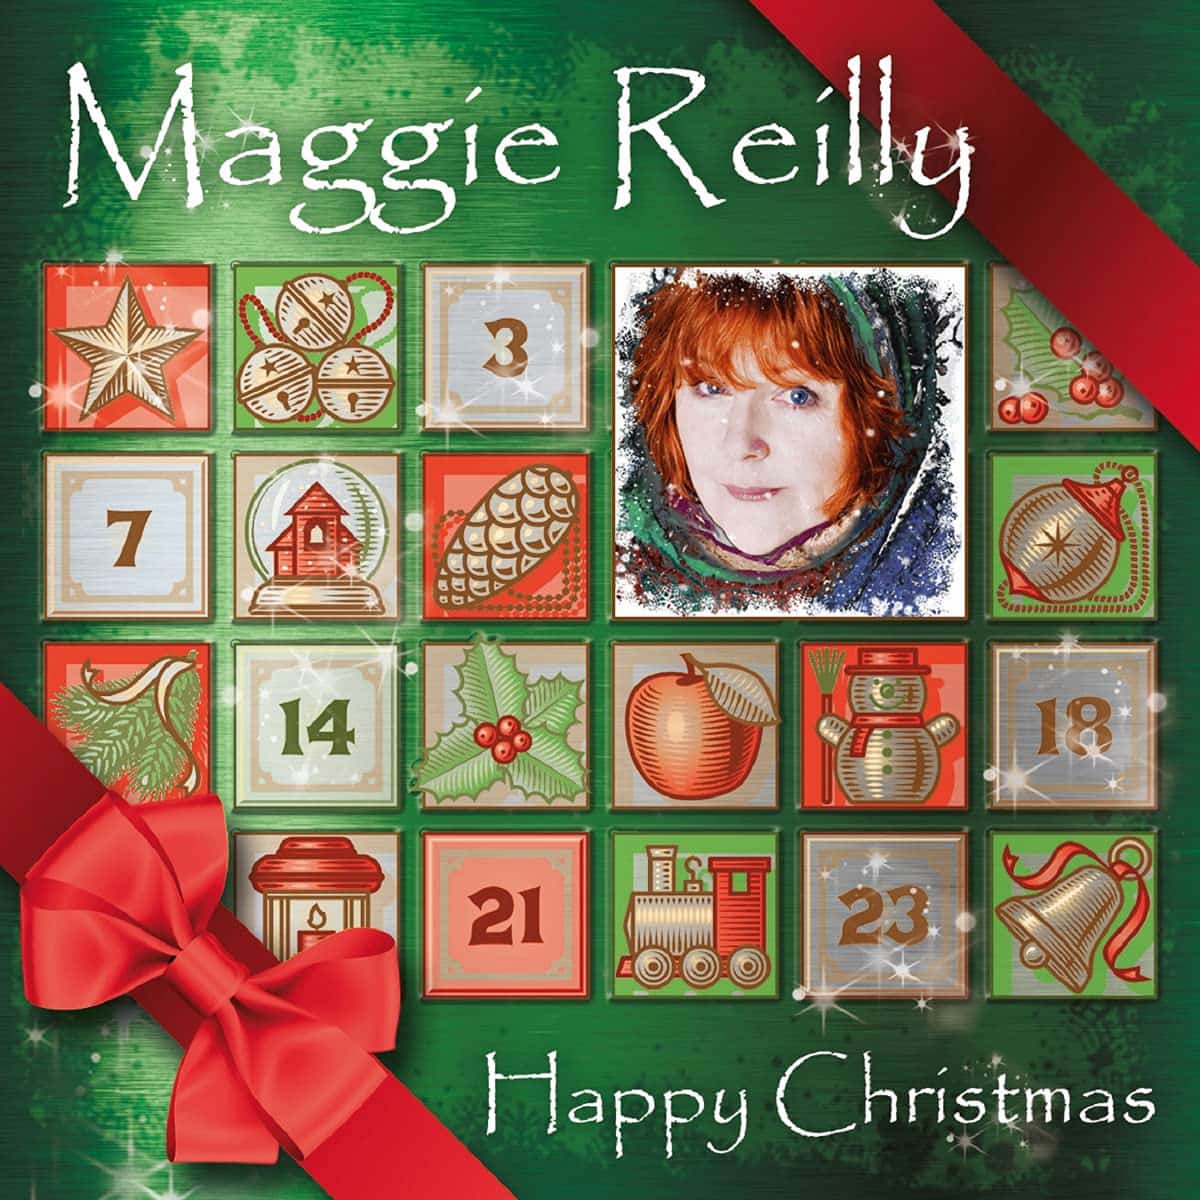 Maggie Reilly CD "Happy Christmas" 2021